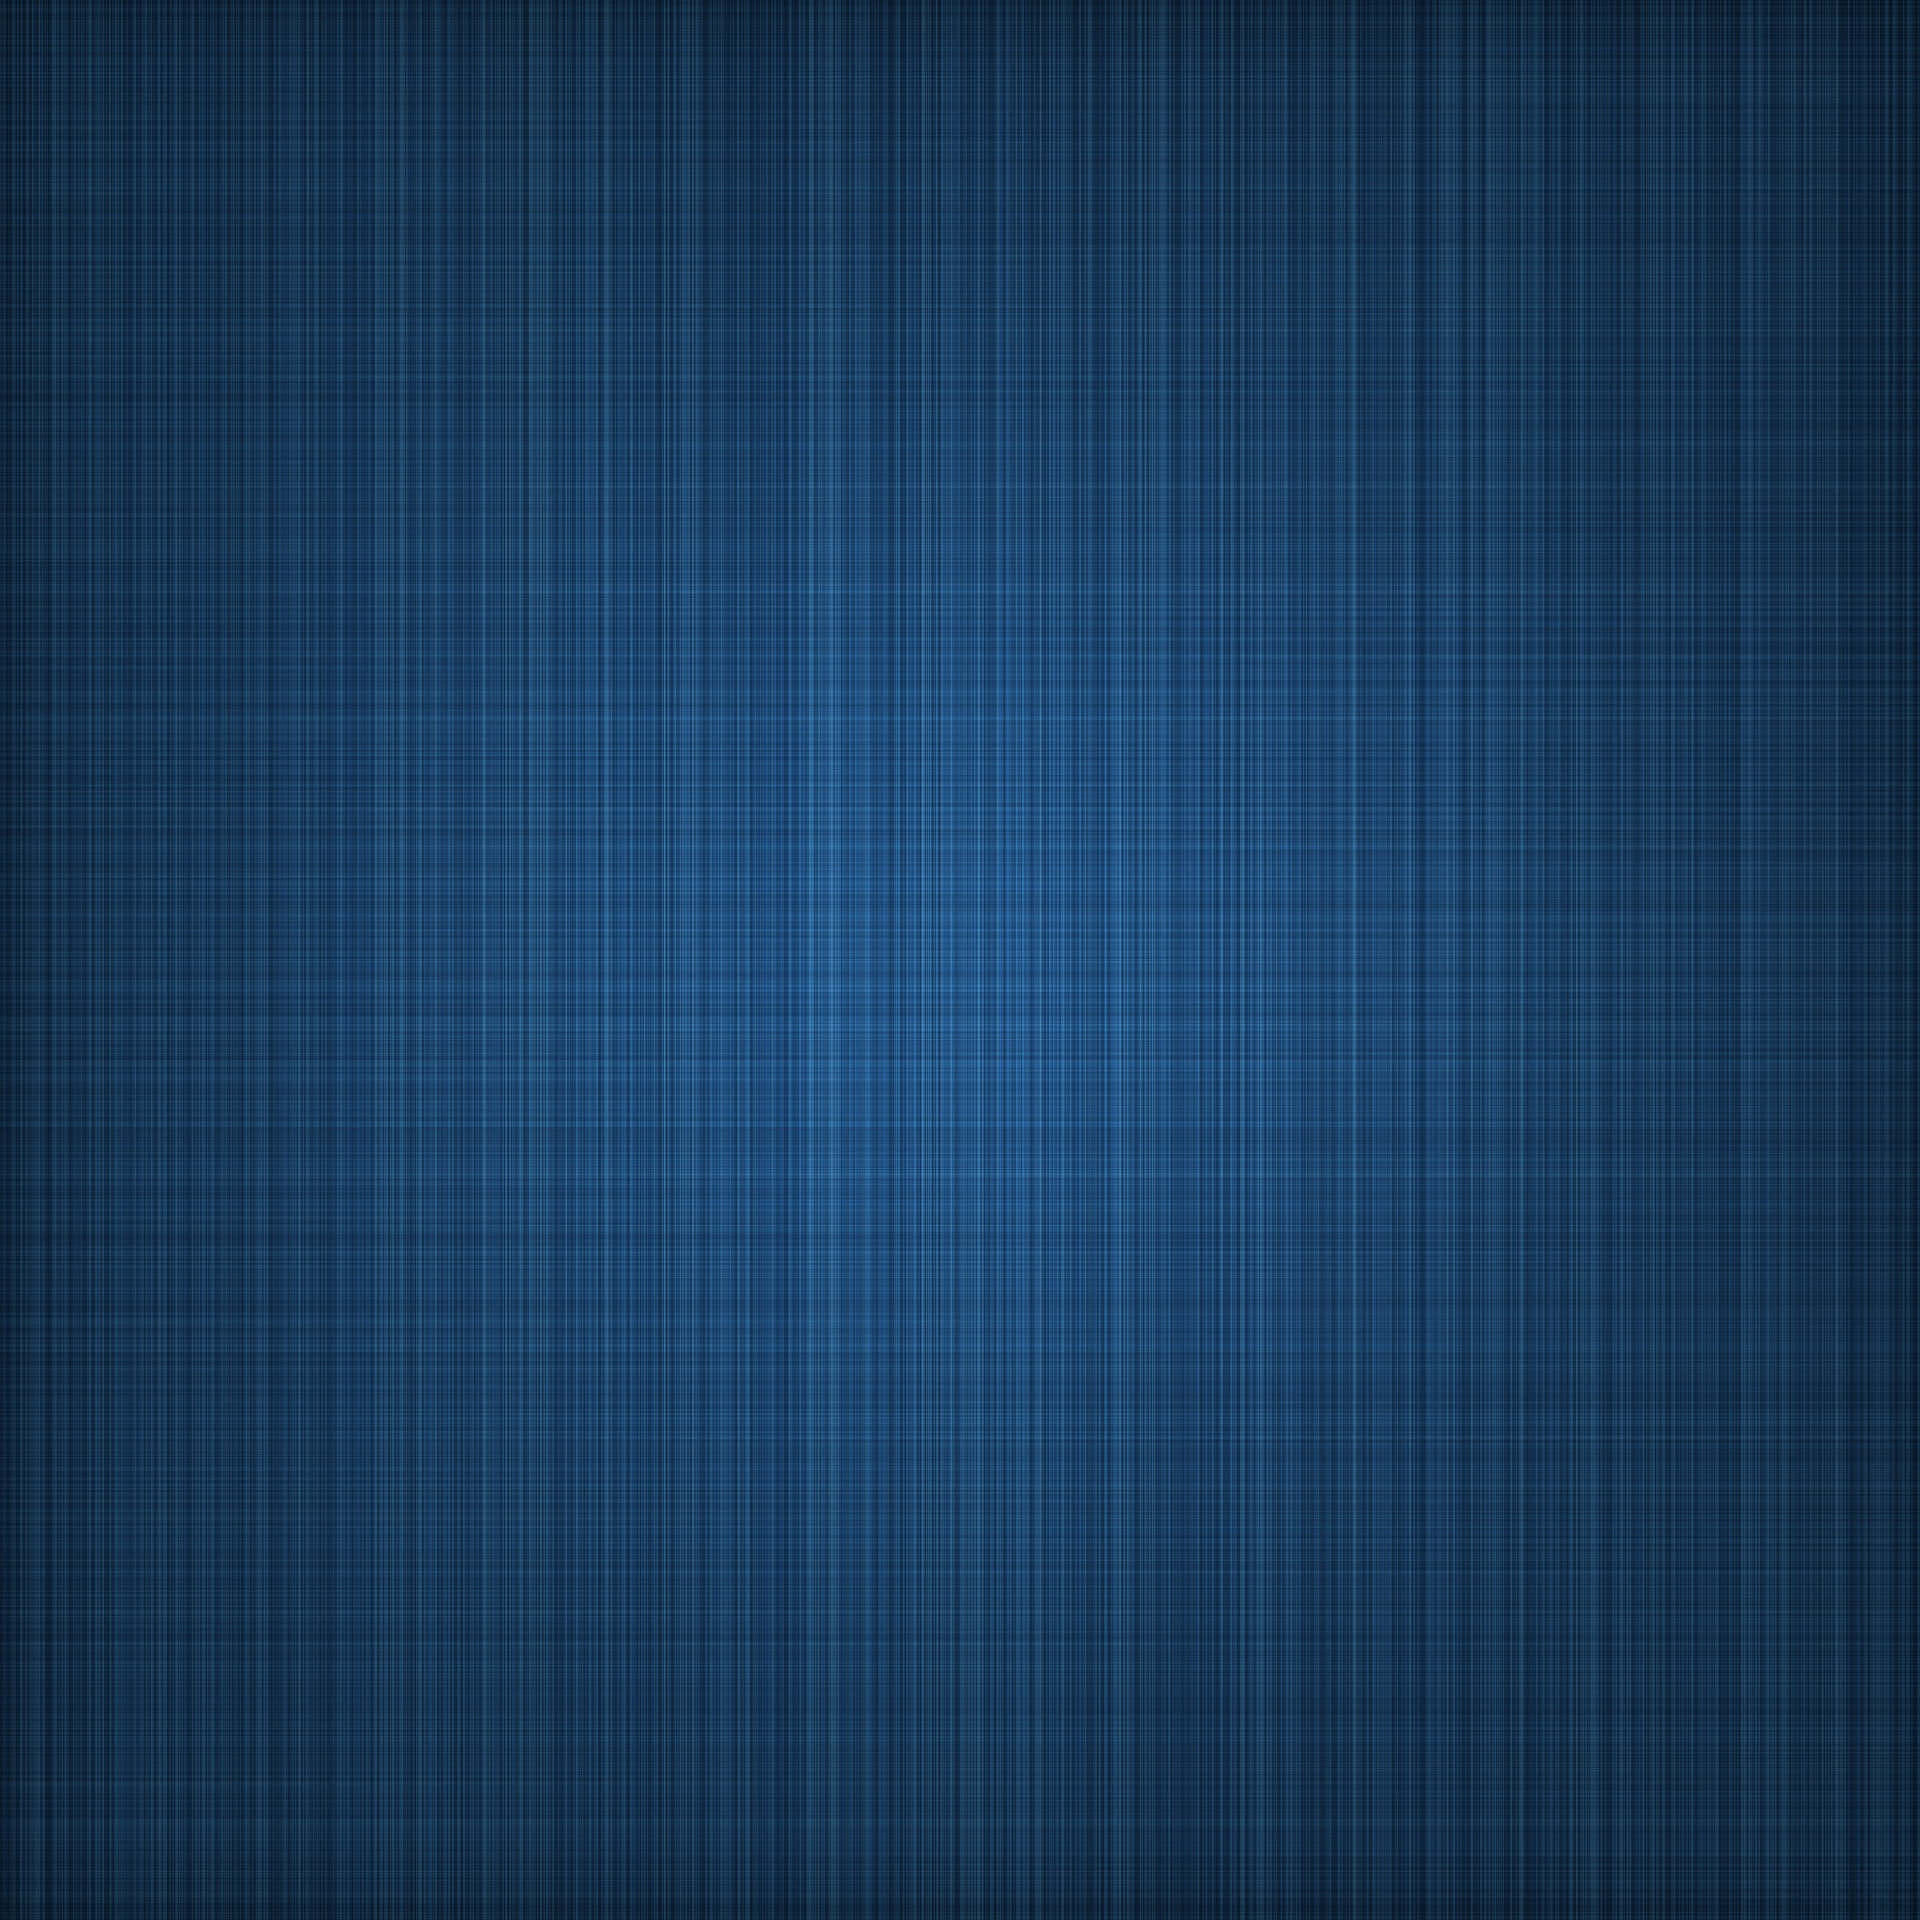 Get more done with the Blue iPad Wallpaper